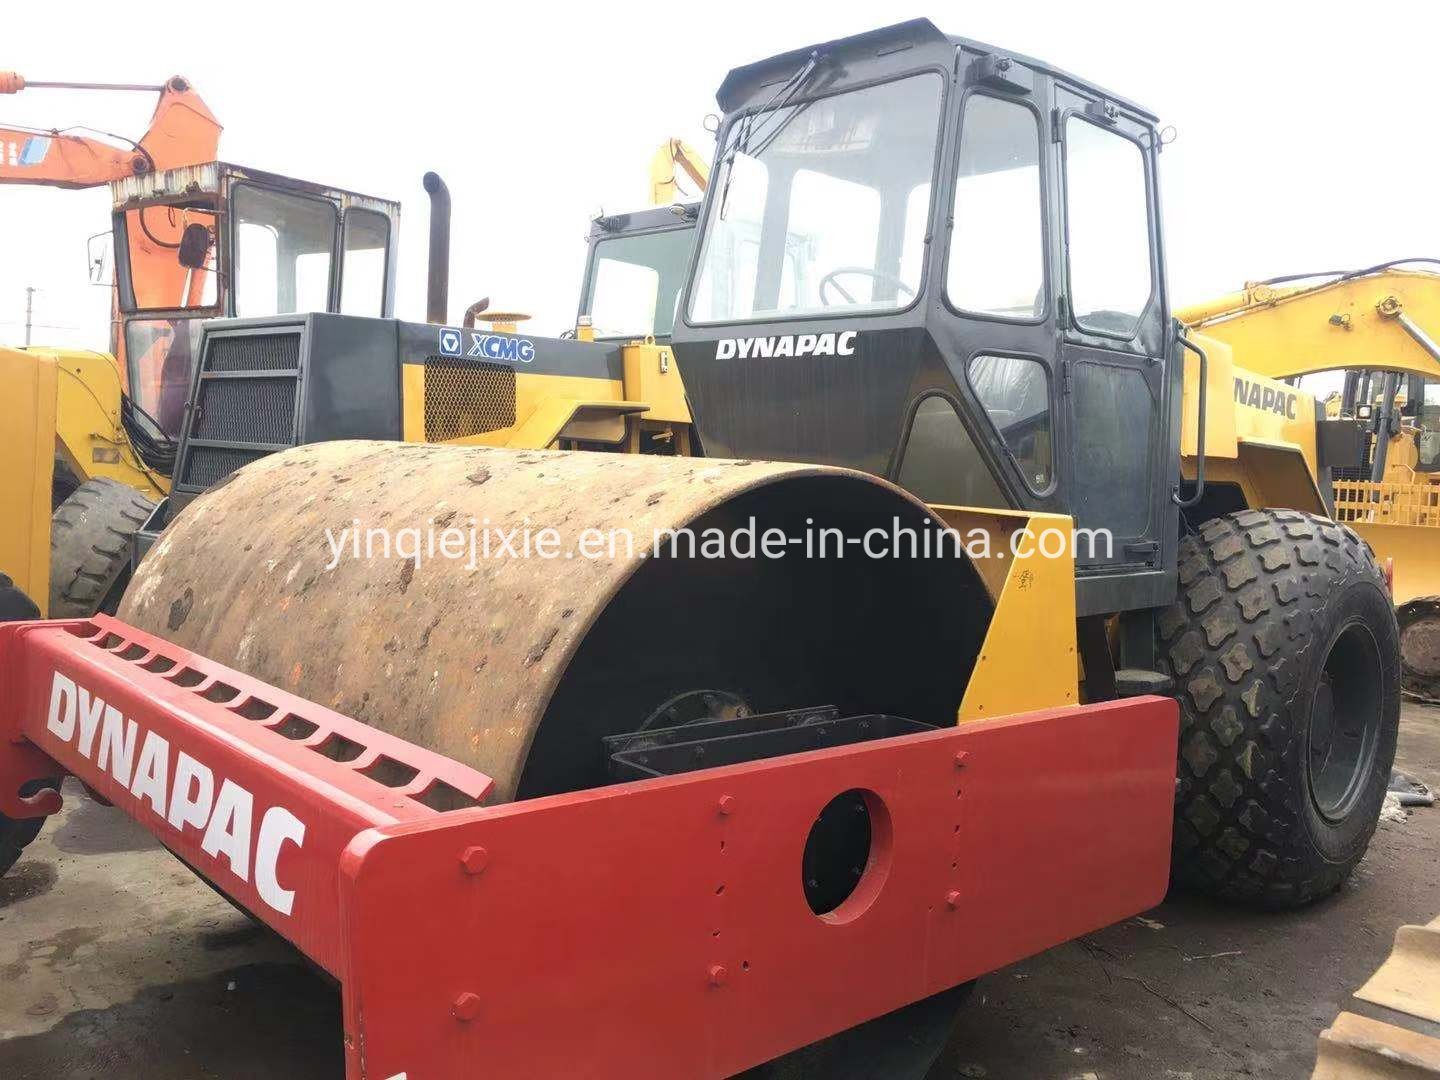 Secondhand Vibratory Roller Used Dynapac Road Roller Ca25 for Sale